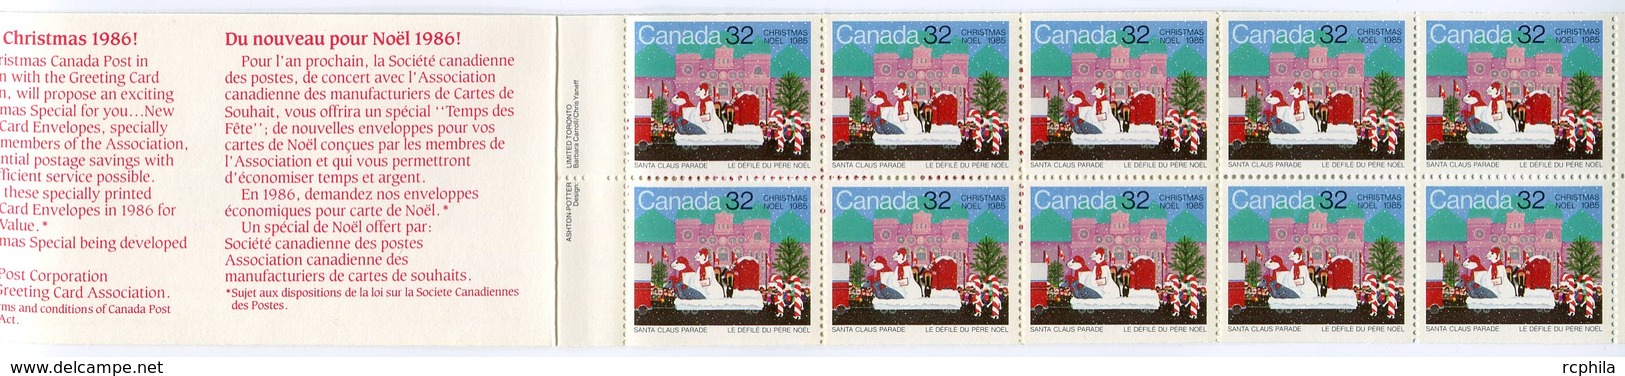 RC 16022 CANADA BK88 CHRISTMAS 1985 CARNET COMPLET BOOKLET MNH NEUF ** - Cuadernillos Completos